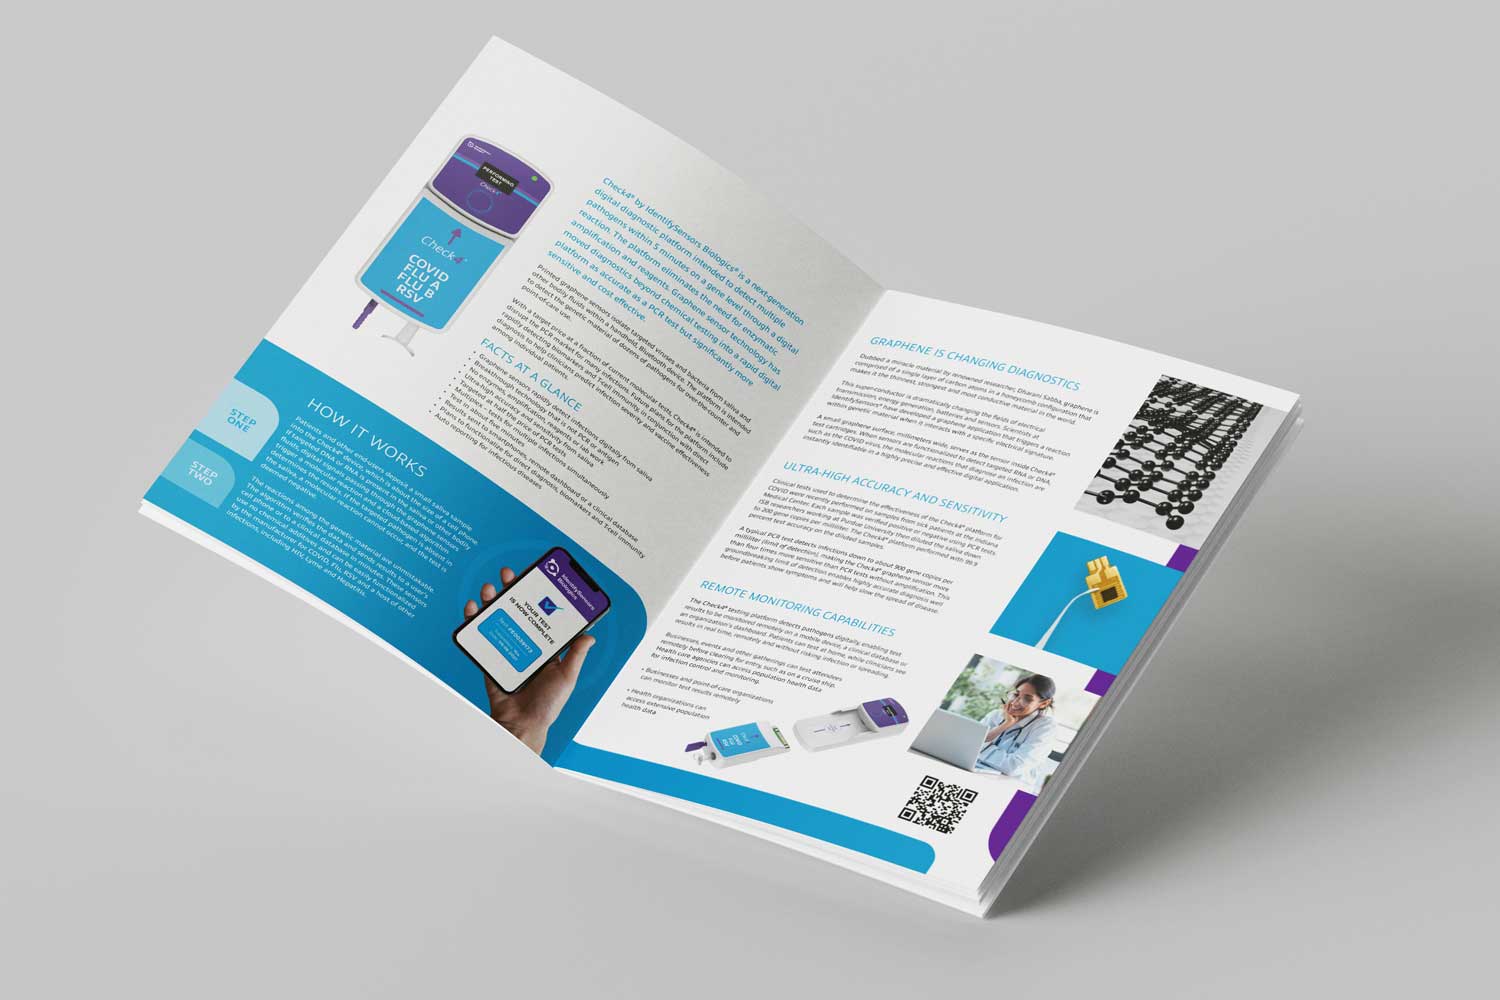 Brochures created for IdentifySensors to be handed out to potential investors.